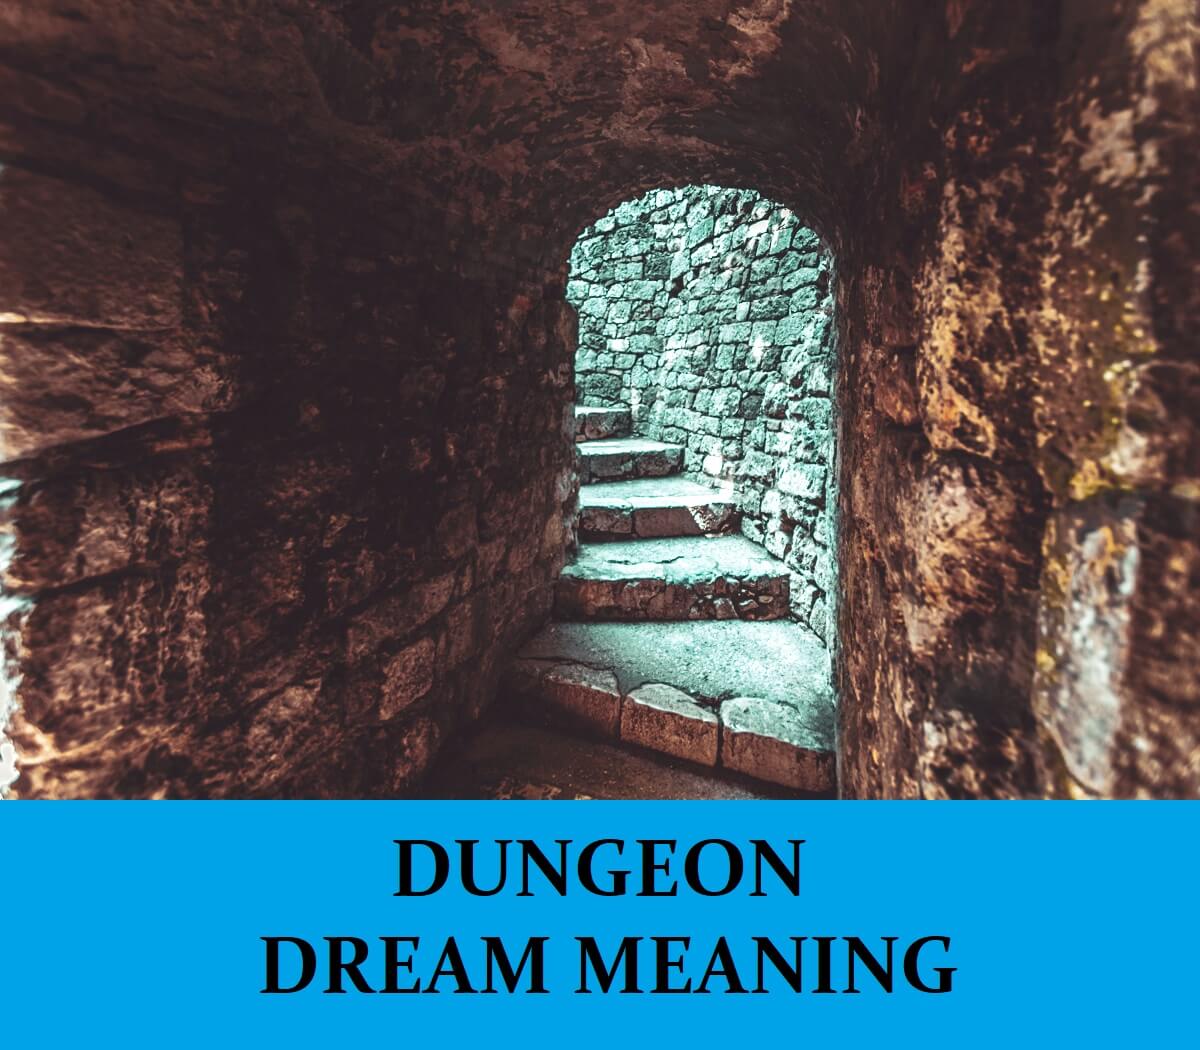 Dream About Dungeons